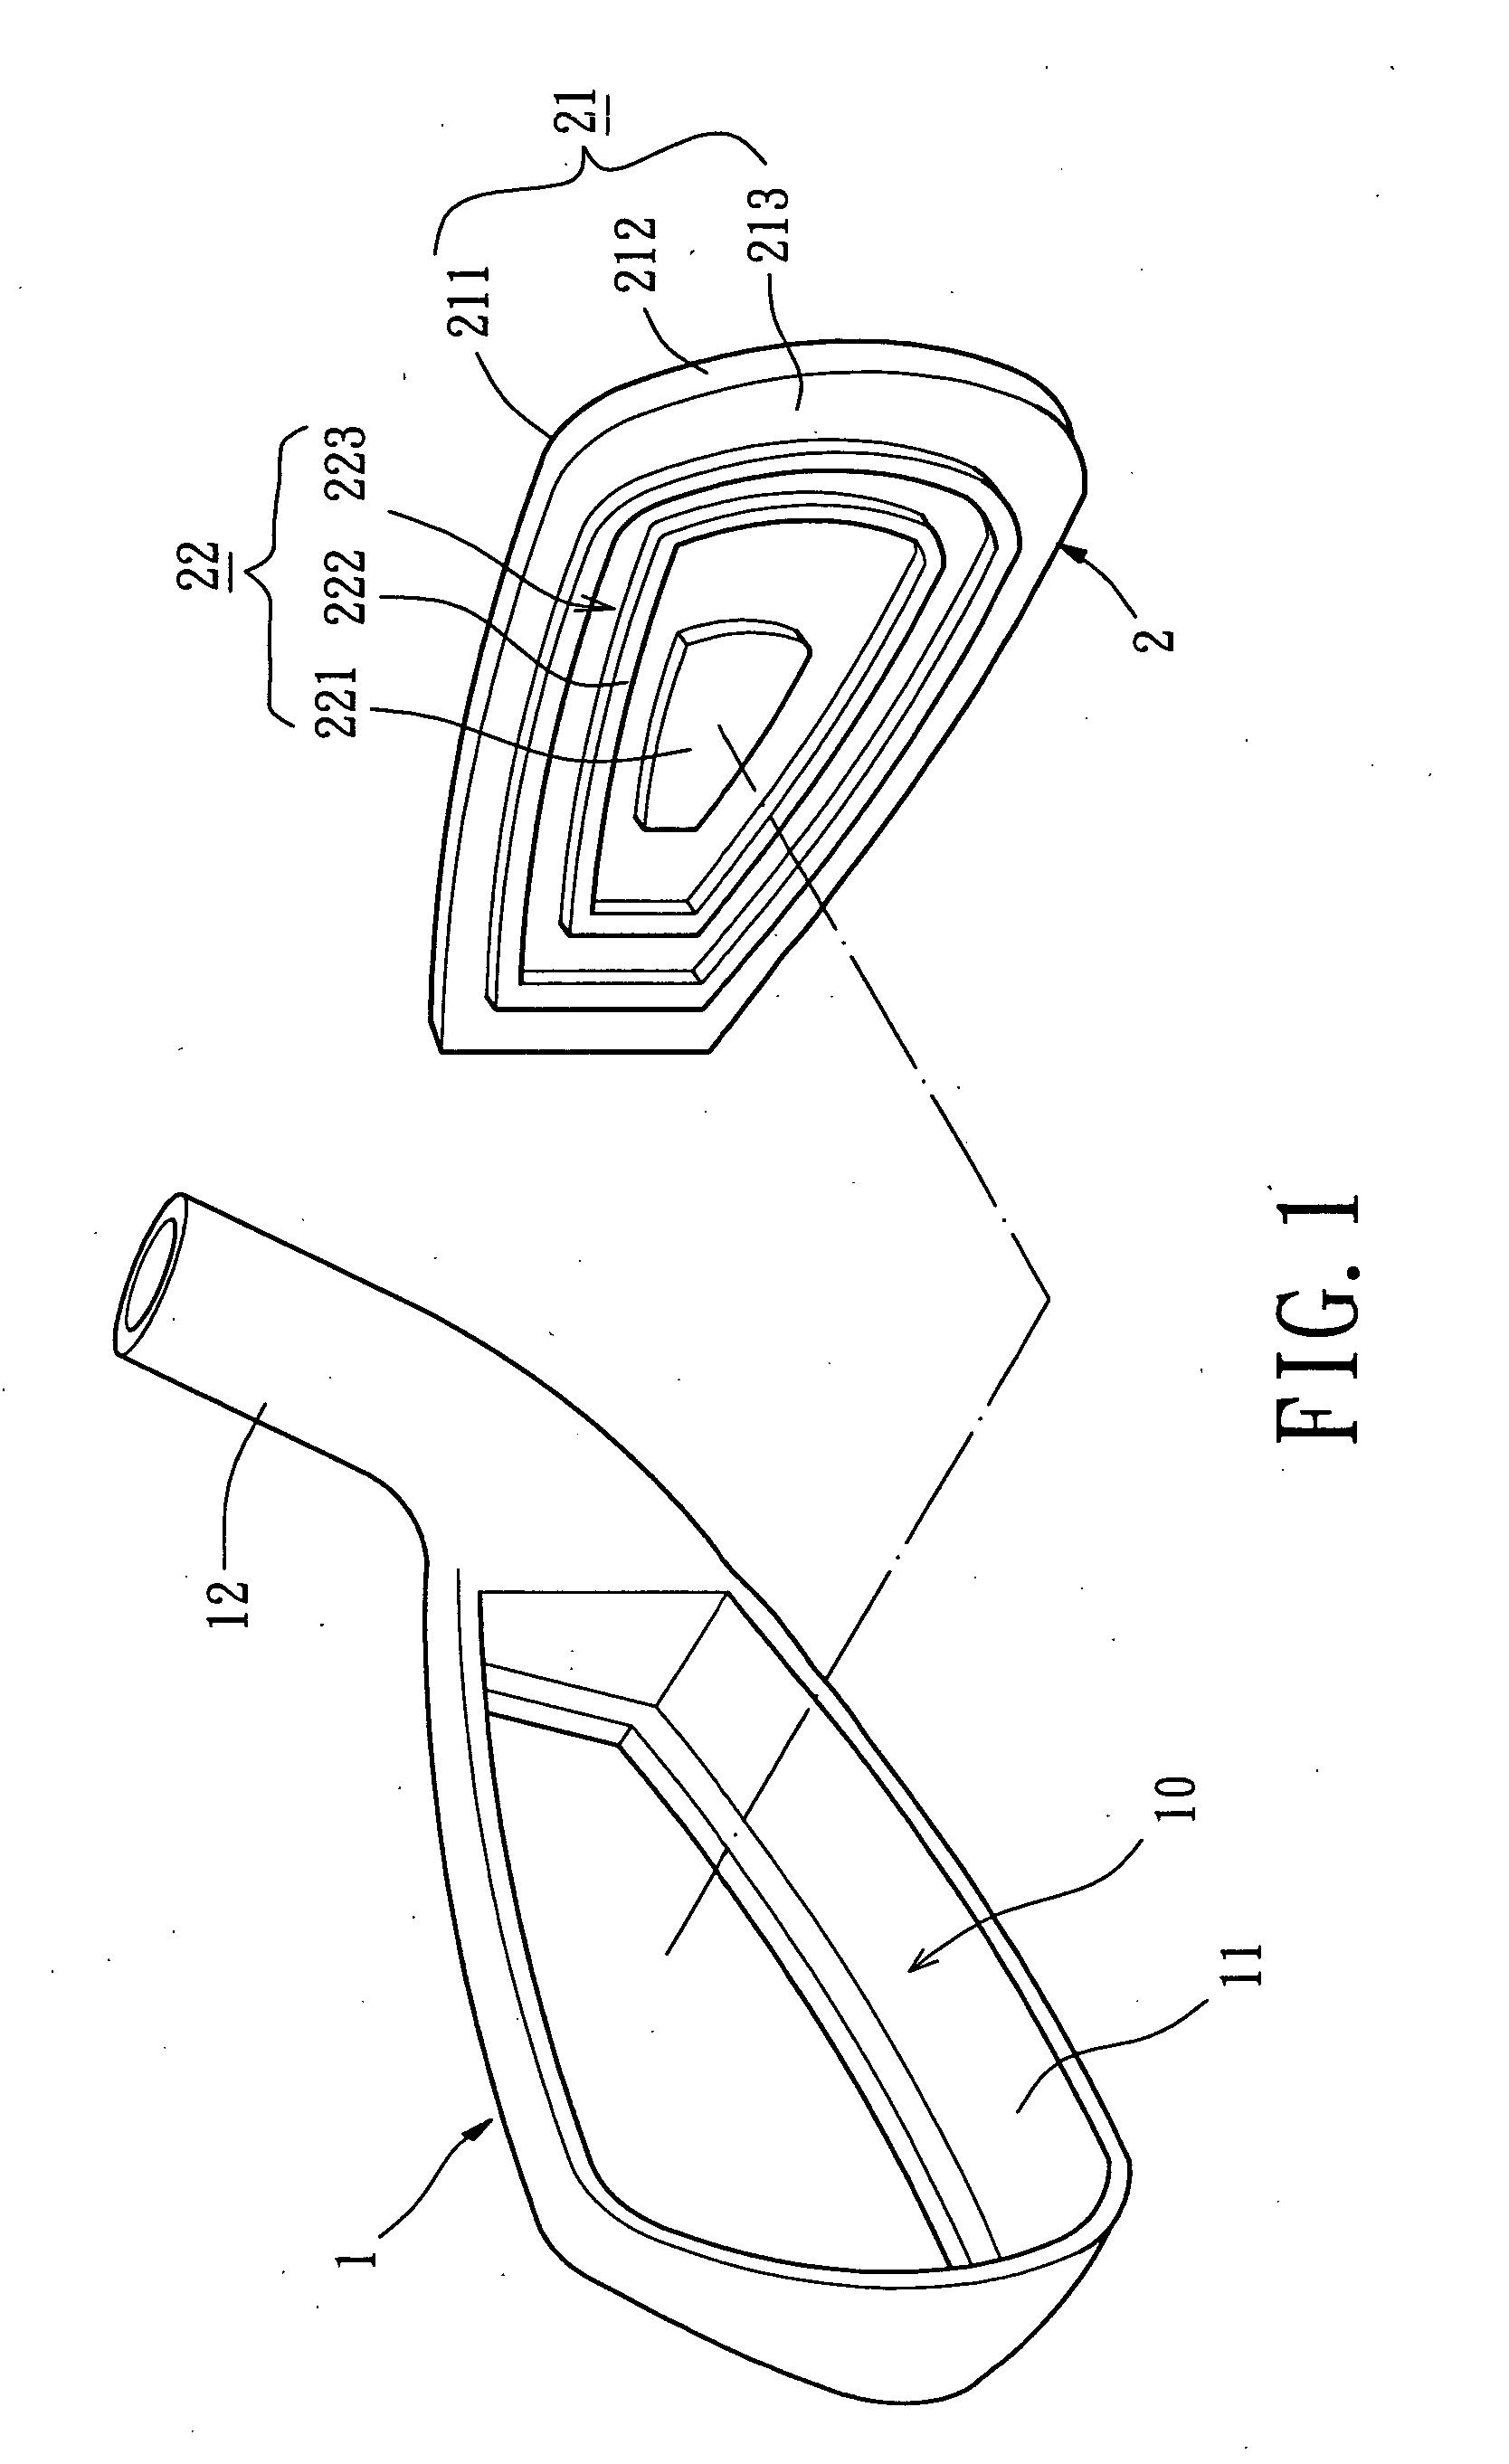 Golf club head having a complex plate formed with an upraised protrusion structure